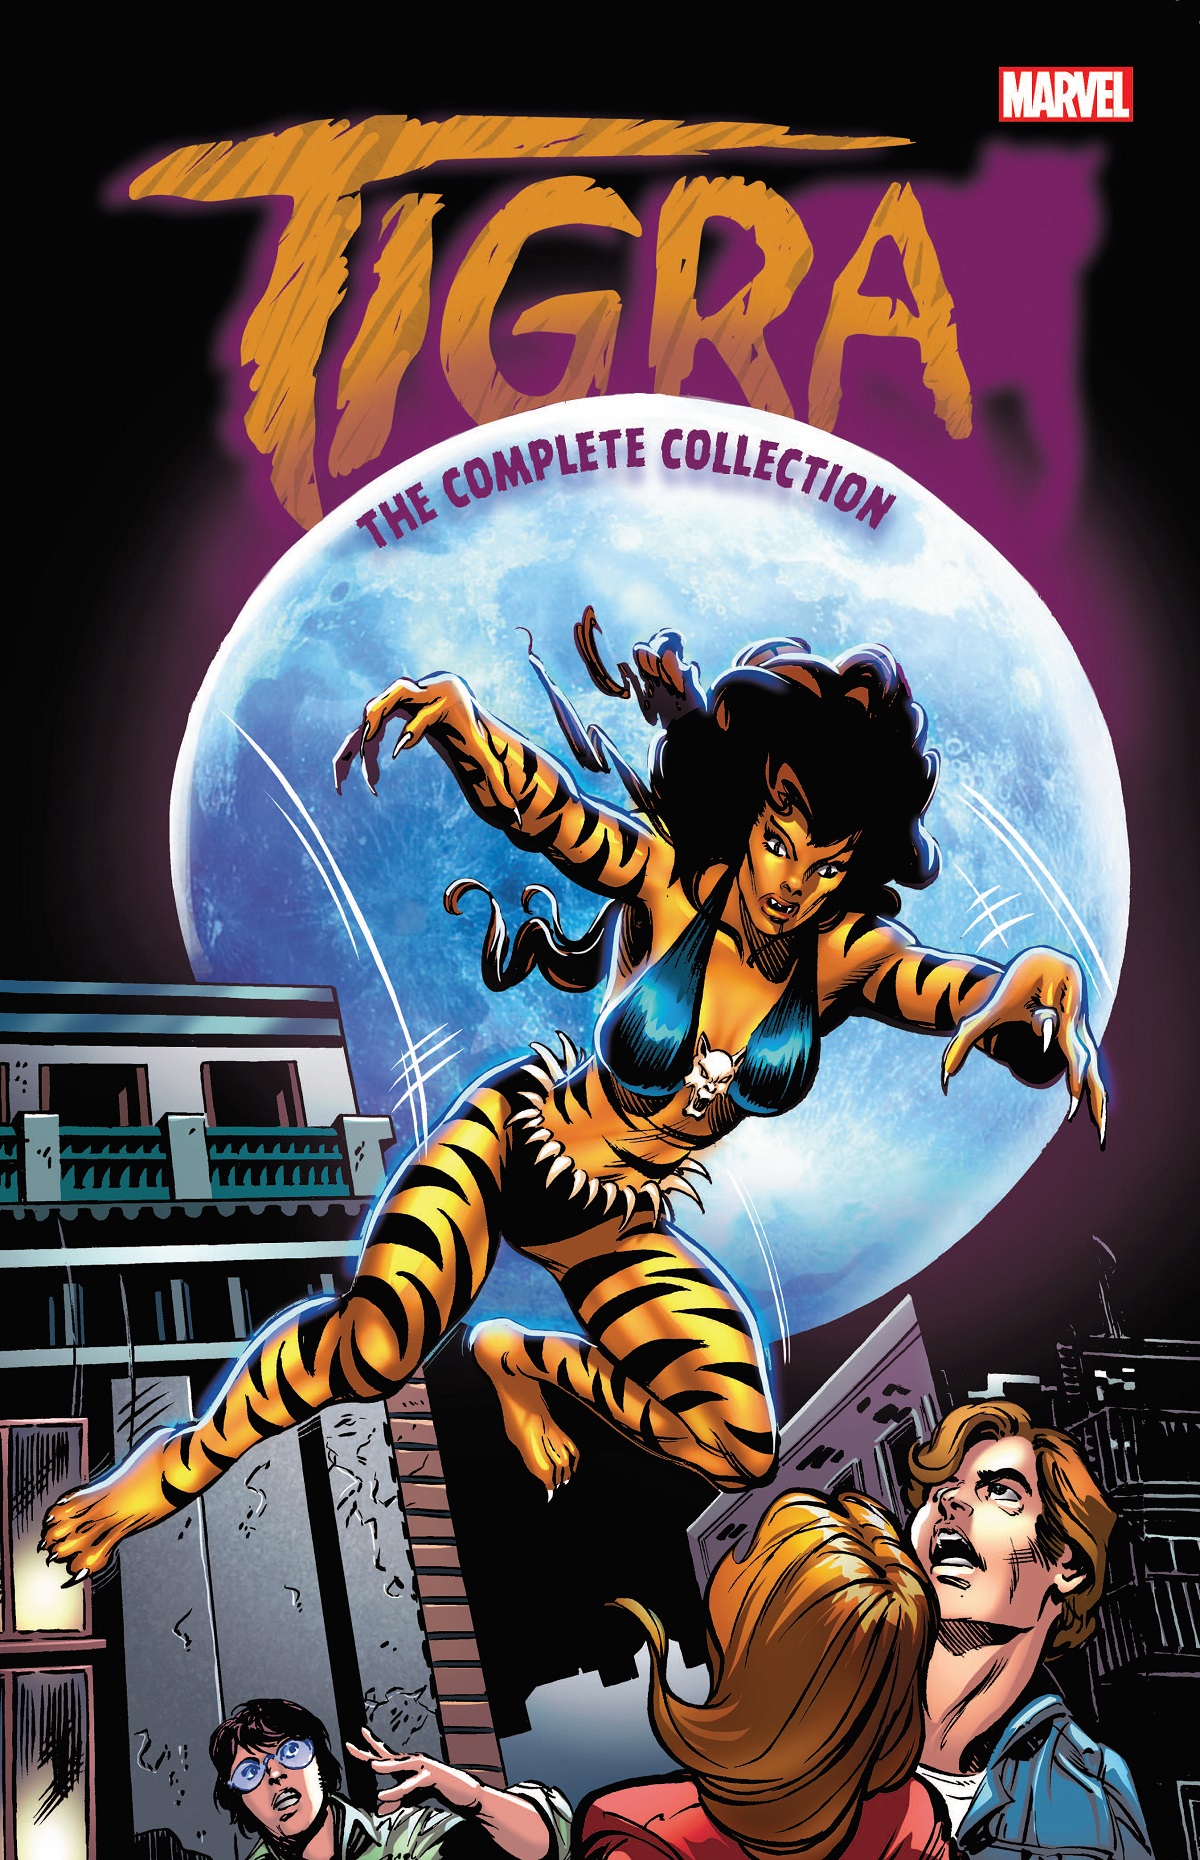 Tigra: The Complete Collection (Trade Paperback)